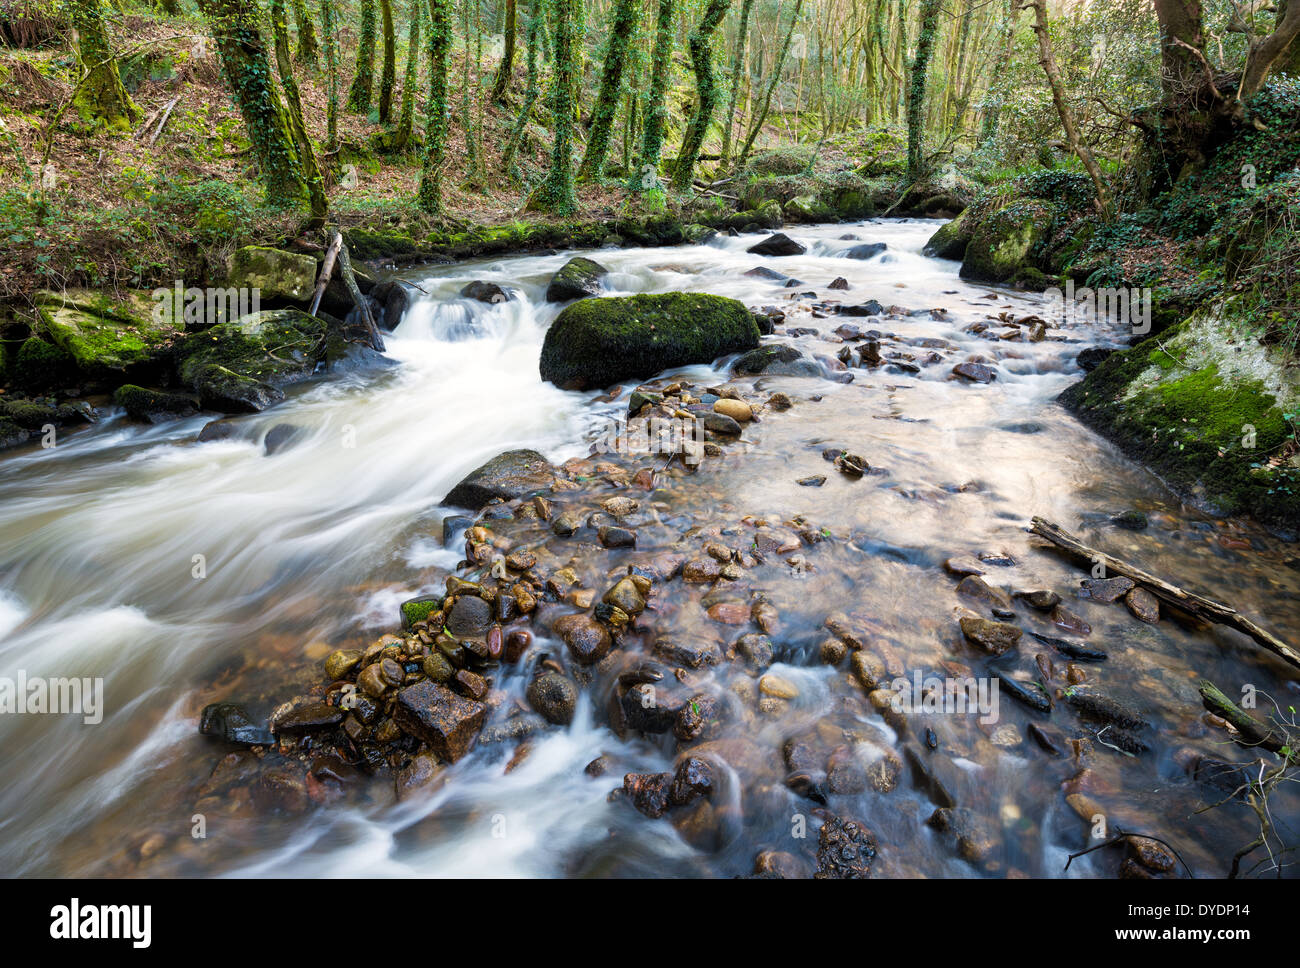 The River Par cascading over mossy boulders at Ponts Mill in the Luxulyan Valley near St Austel in Cornwall Stock Photo